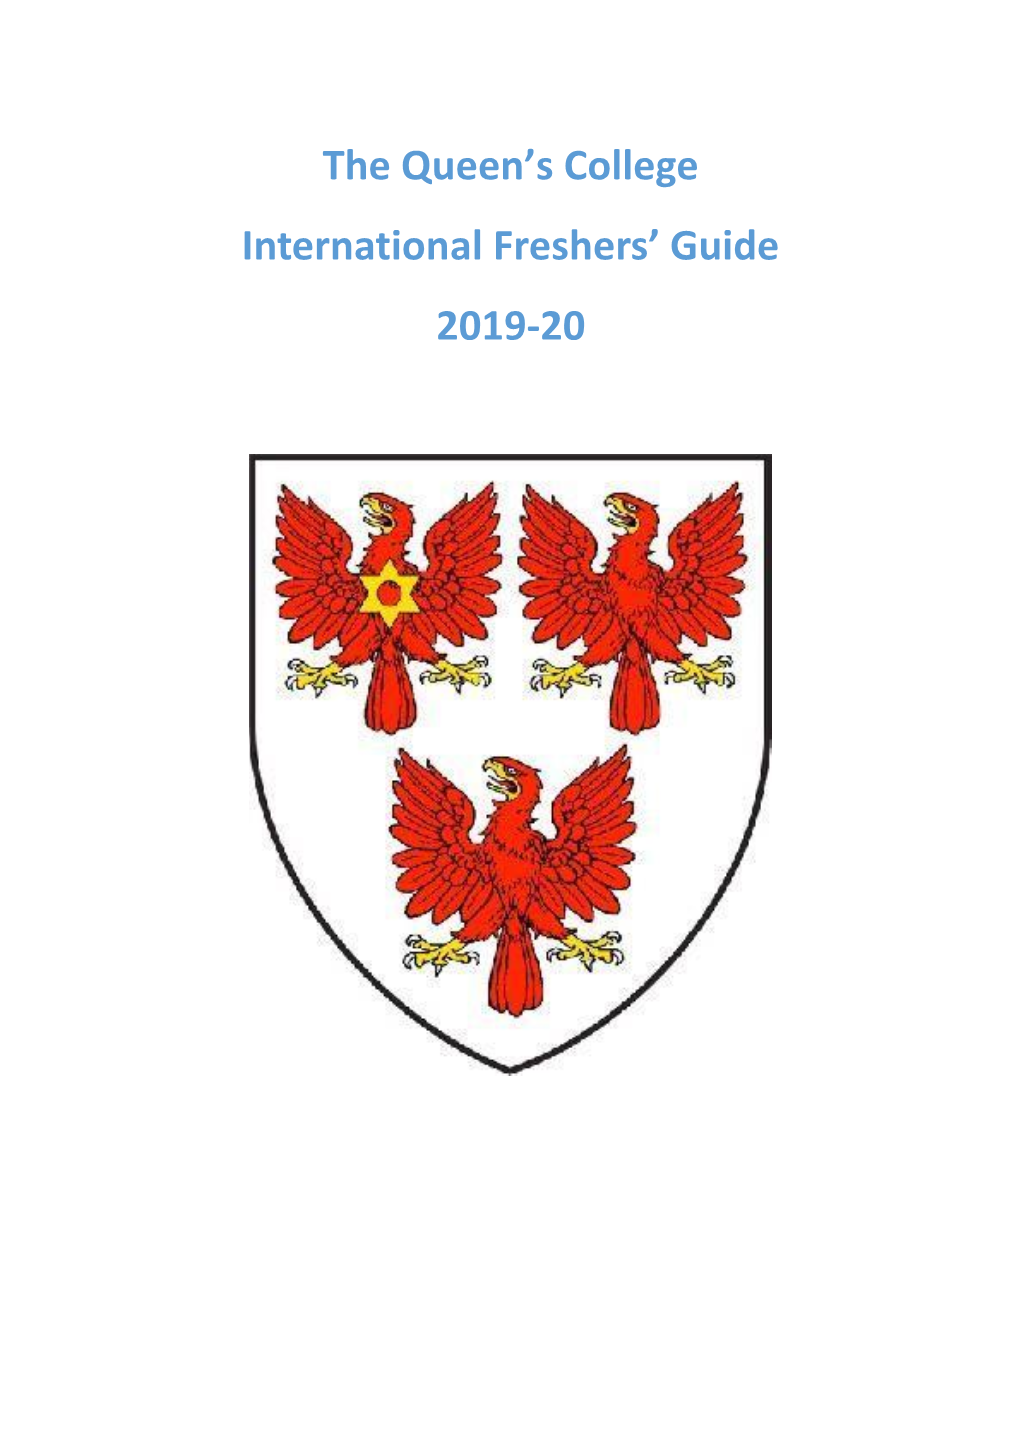 The Queen's College International Freshers' Guide 2019-20